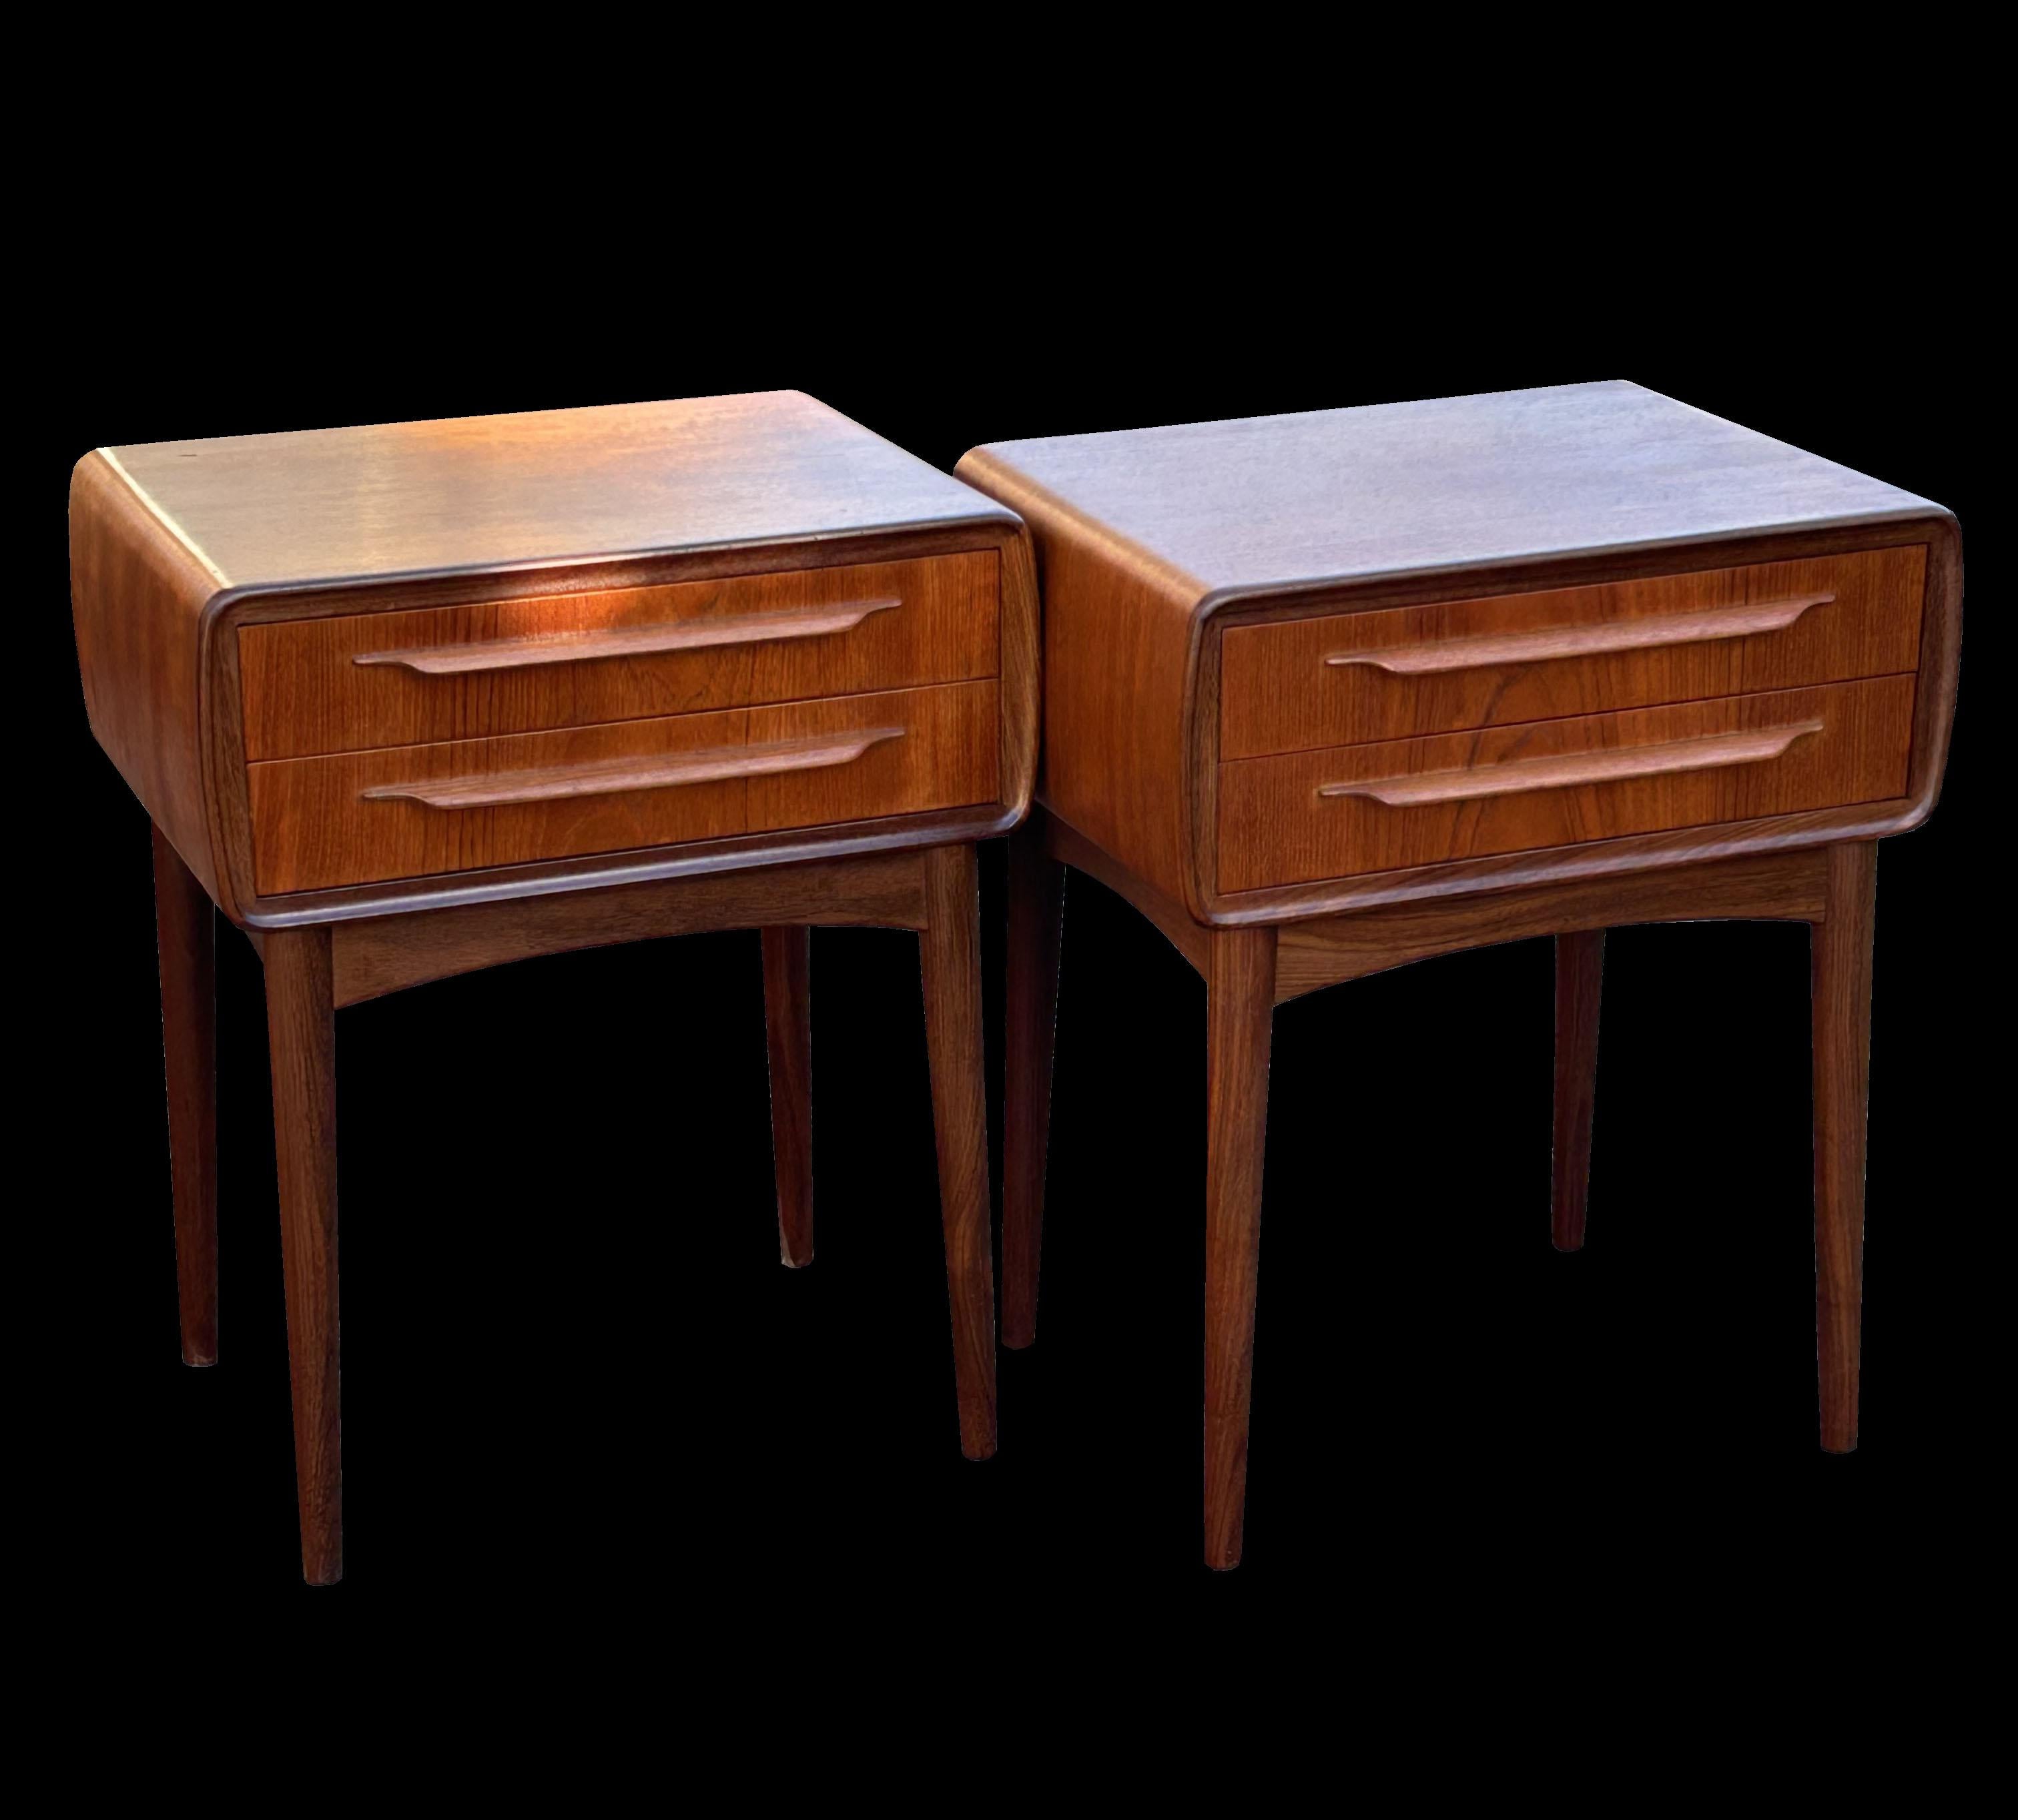 A beautiful pair of original teak bedsides by Johannes Andersen in superb original condition, with no damage and a lovely patina.
we take our photos in daylight to best show the true colours, the darker photos is with no sun and the lighter are when